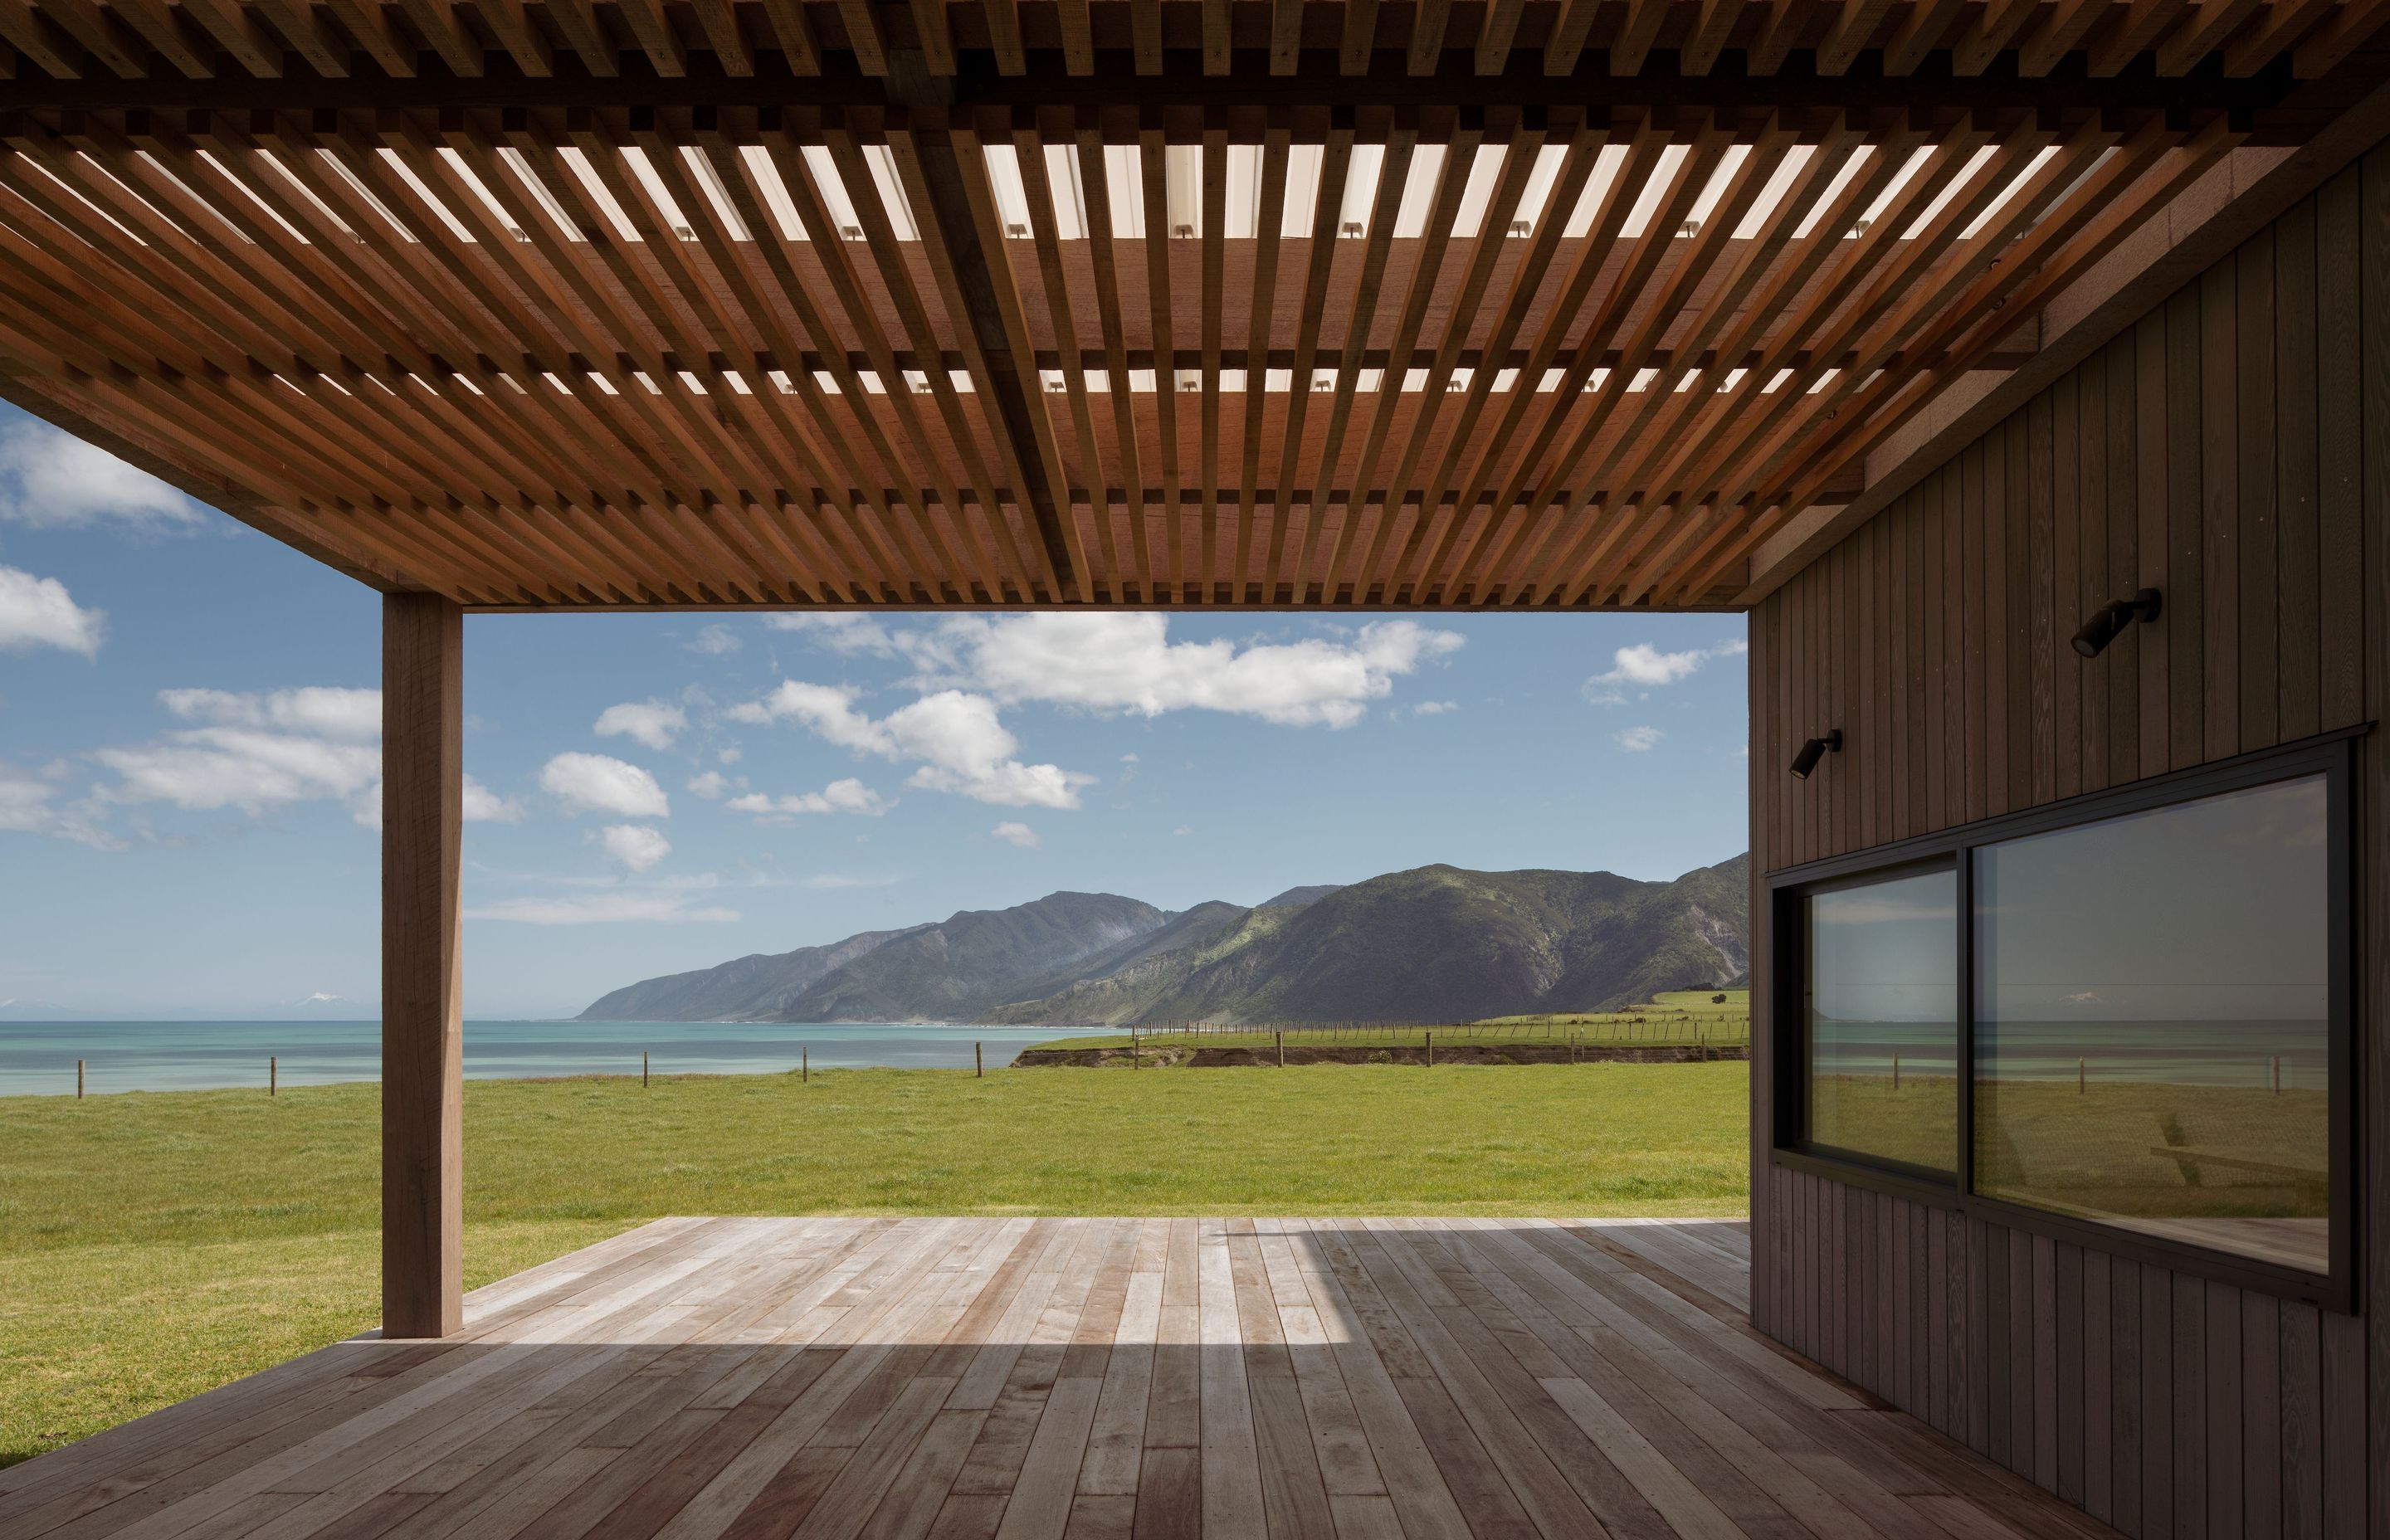 The design of the house needed to be robust enough to withstand the southerly storms that roll in off the Pacific Ocean but warm and inviting enough to allow the owners to take advantage of the natural elements, too.